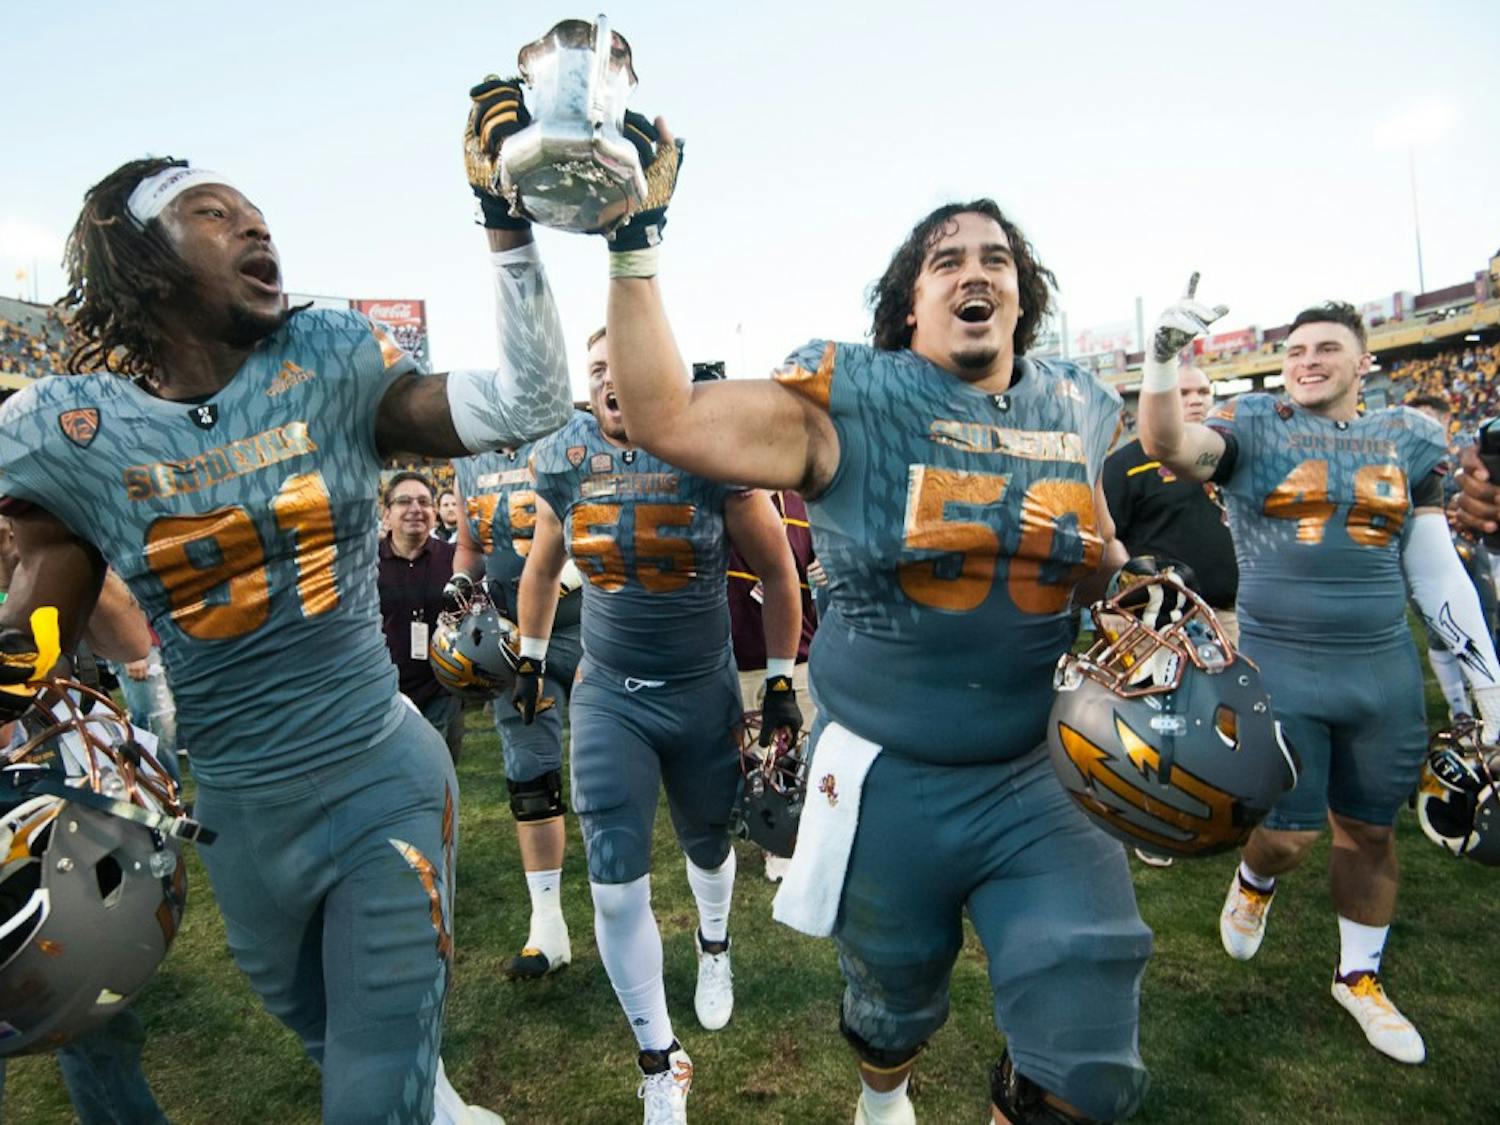 Redshirt senior wide receiver Gary Chambers (81) and senior offensive lineman Nick Kelly (50) carry the Territorial Cup off the field after defeating UA on Saturday, Nov. 21, 2015, at Sun Devil Stadium in Tempe.